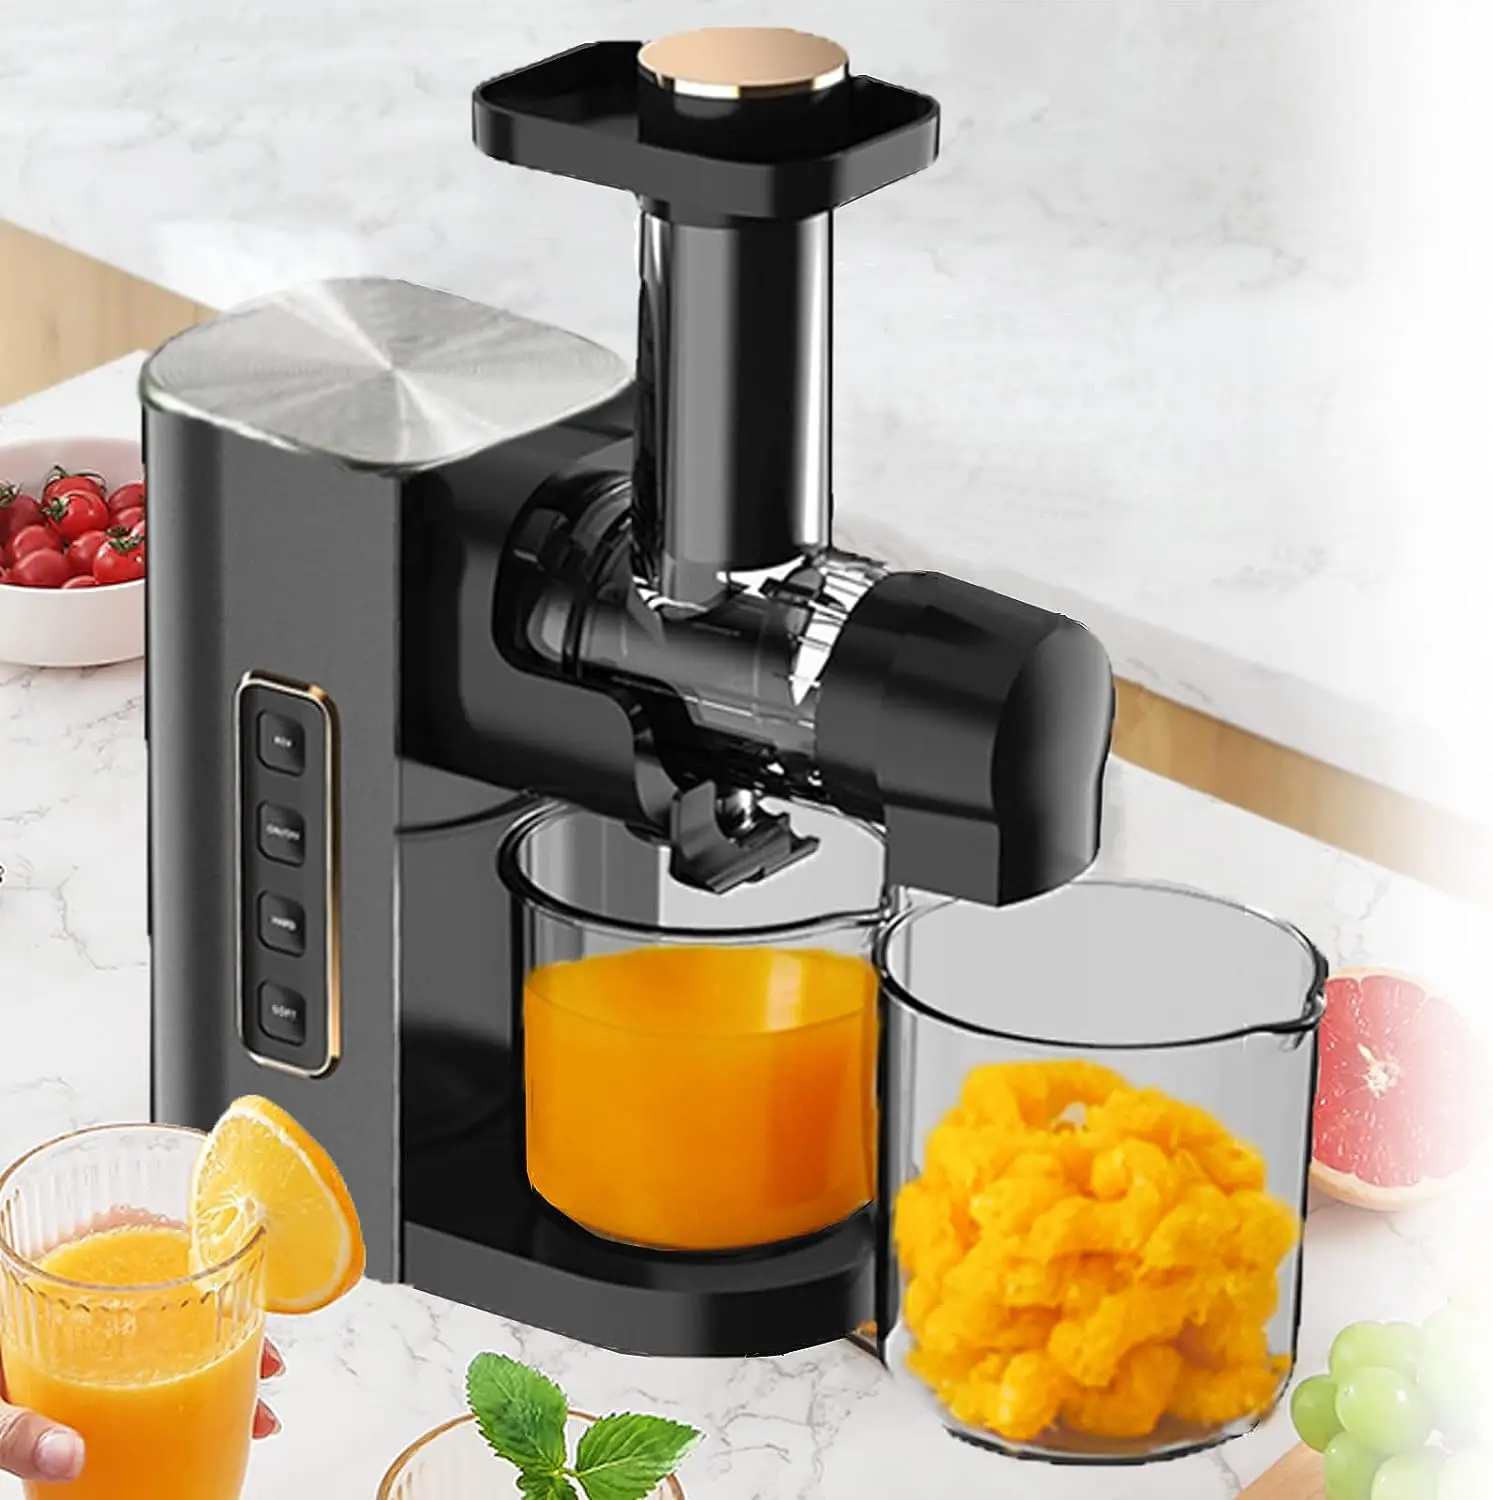 https://ae01.alicdn.com/kf/S8464ae3940cc4013a95b9f88907041e48/Extractor-with-2-Speed-Modes-Cold-Press-Juicer-Machine-Quiet-Motor-Reverse-Function-Easy-to-Clean.jpg